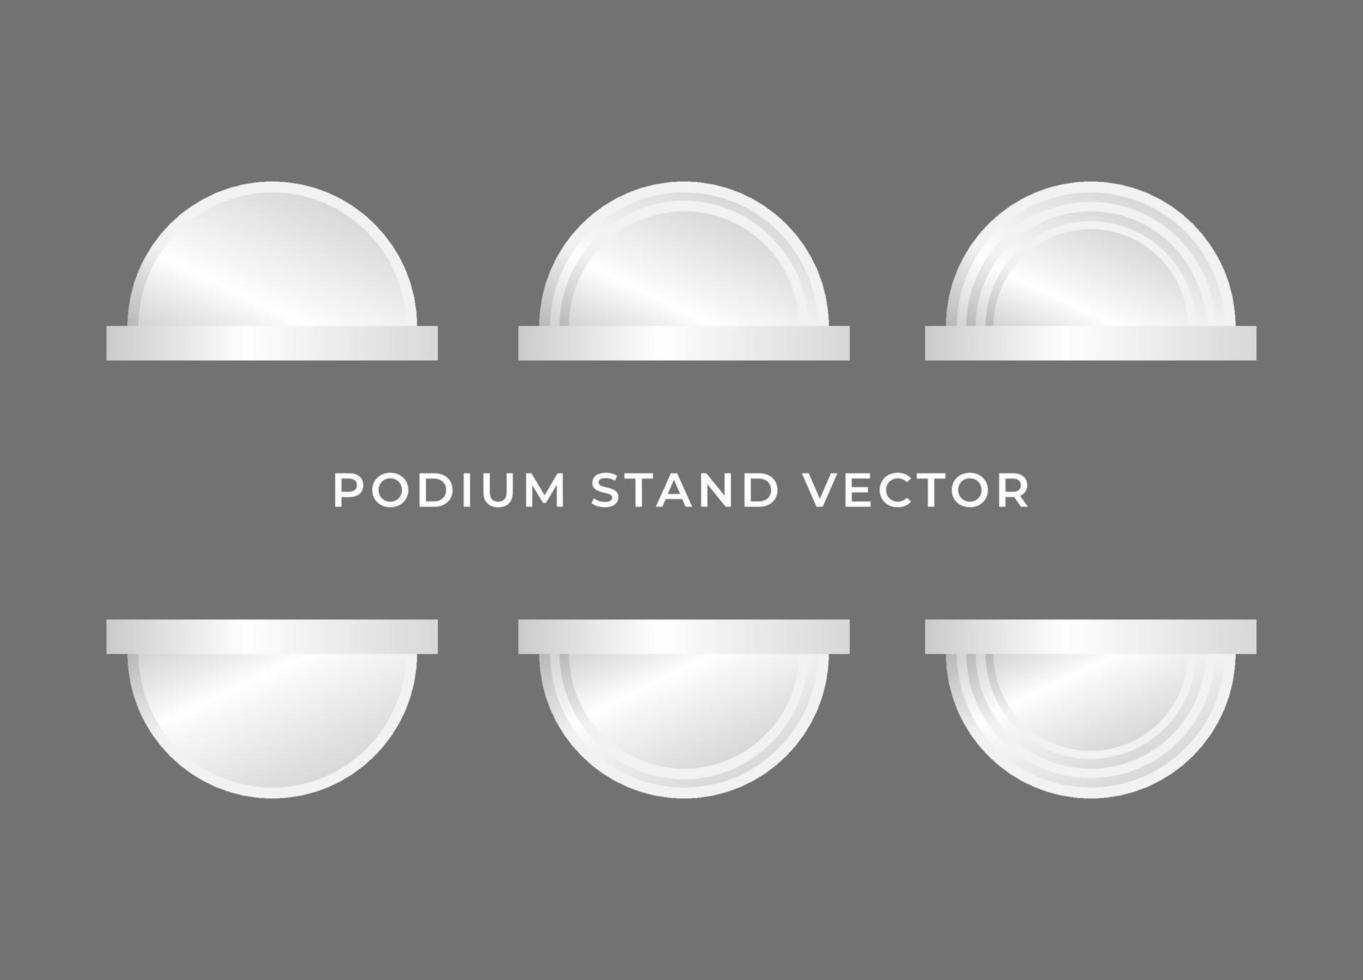 Simple podium stand 3D vector whit white shape. Background or frame are different step on grey background. The podium can be put text or product on the podium.